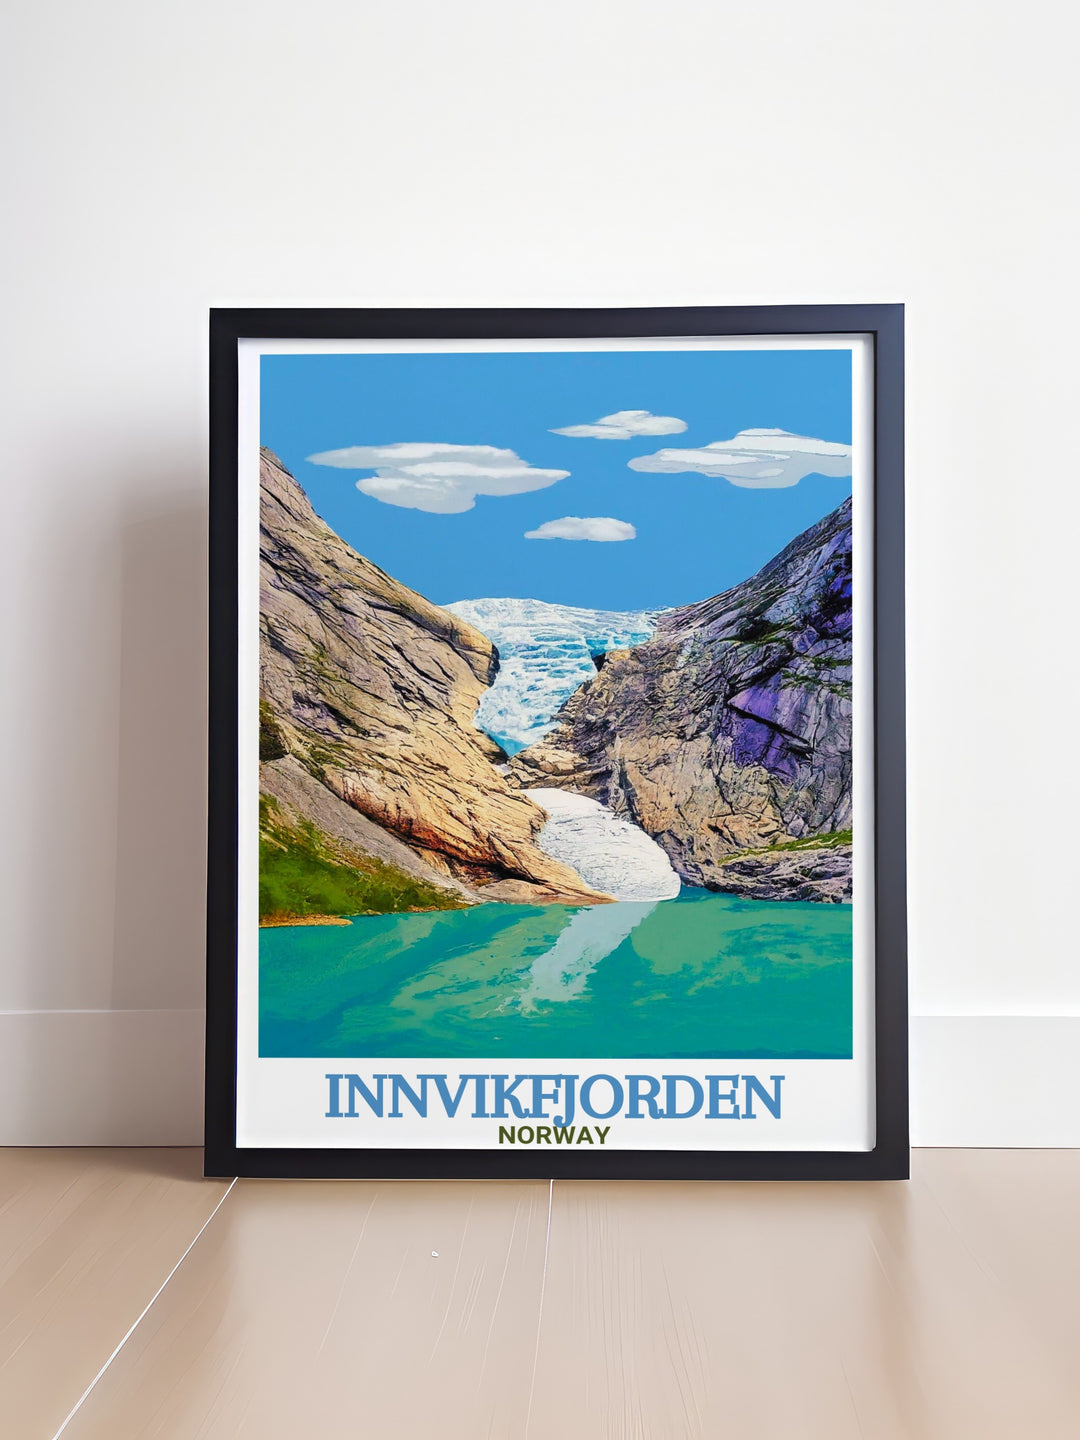 Scenic Briksdalsbreen Glacier artwork capturing the peaceful fjord scenery of Norway nature and Nordic beauty perfect for home décor or gifts